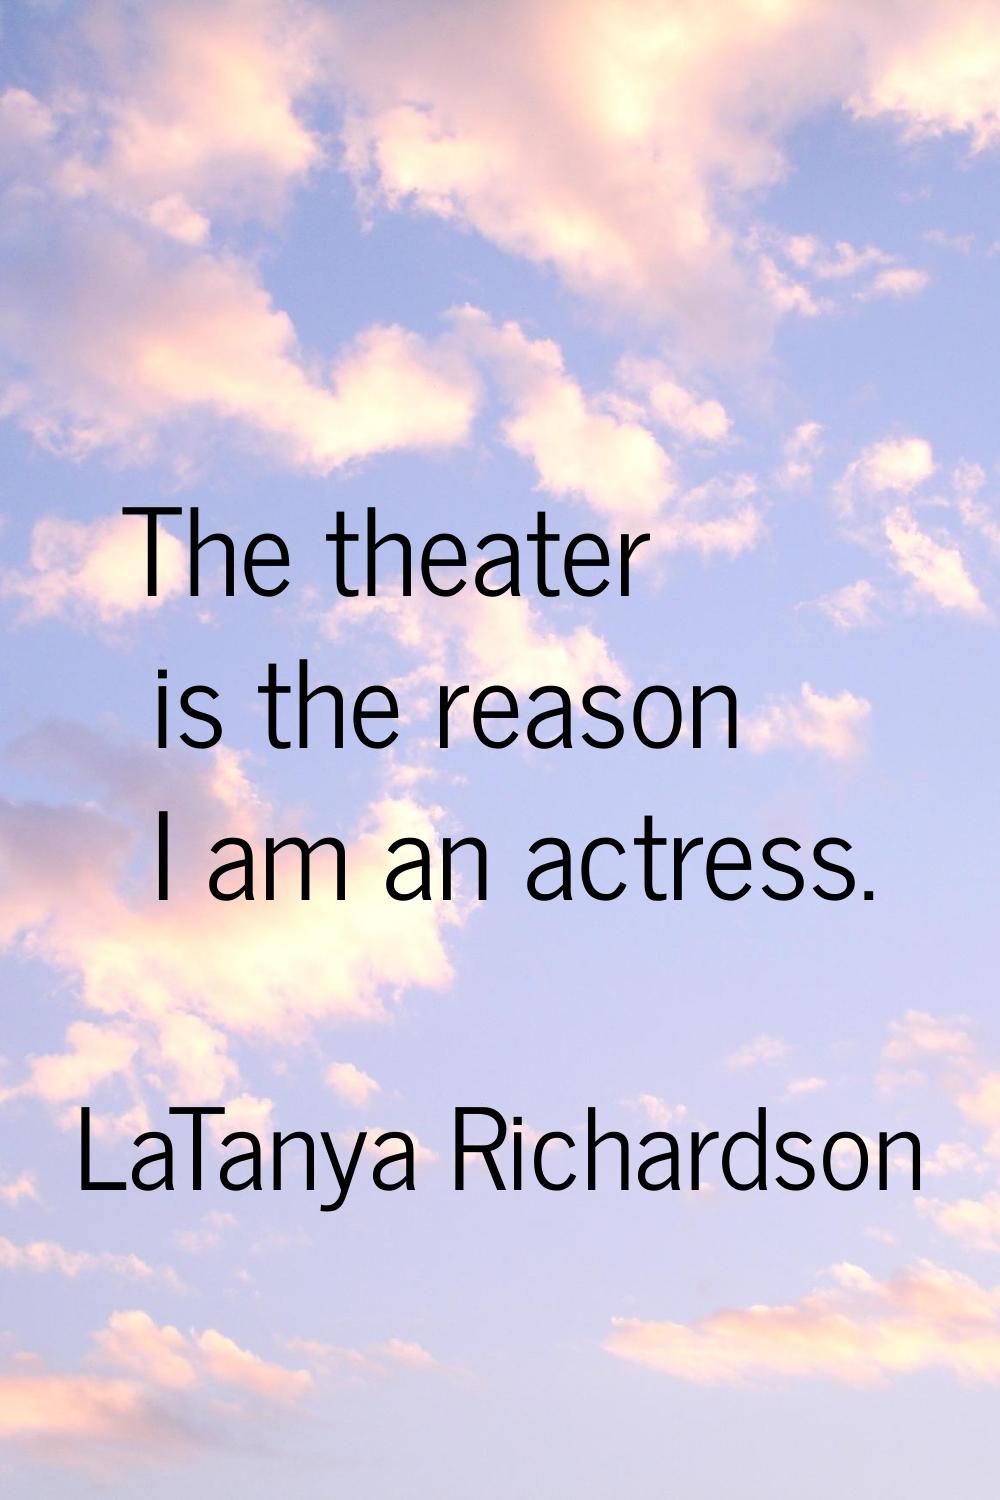 The theater is the reason I am an actress.